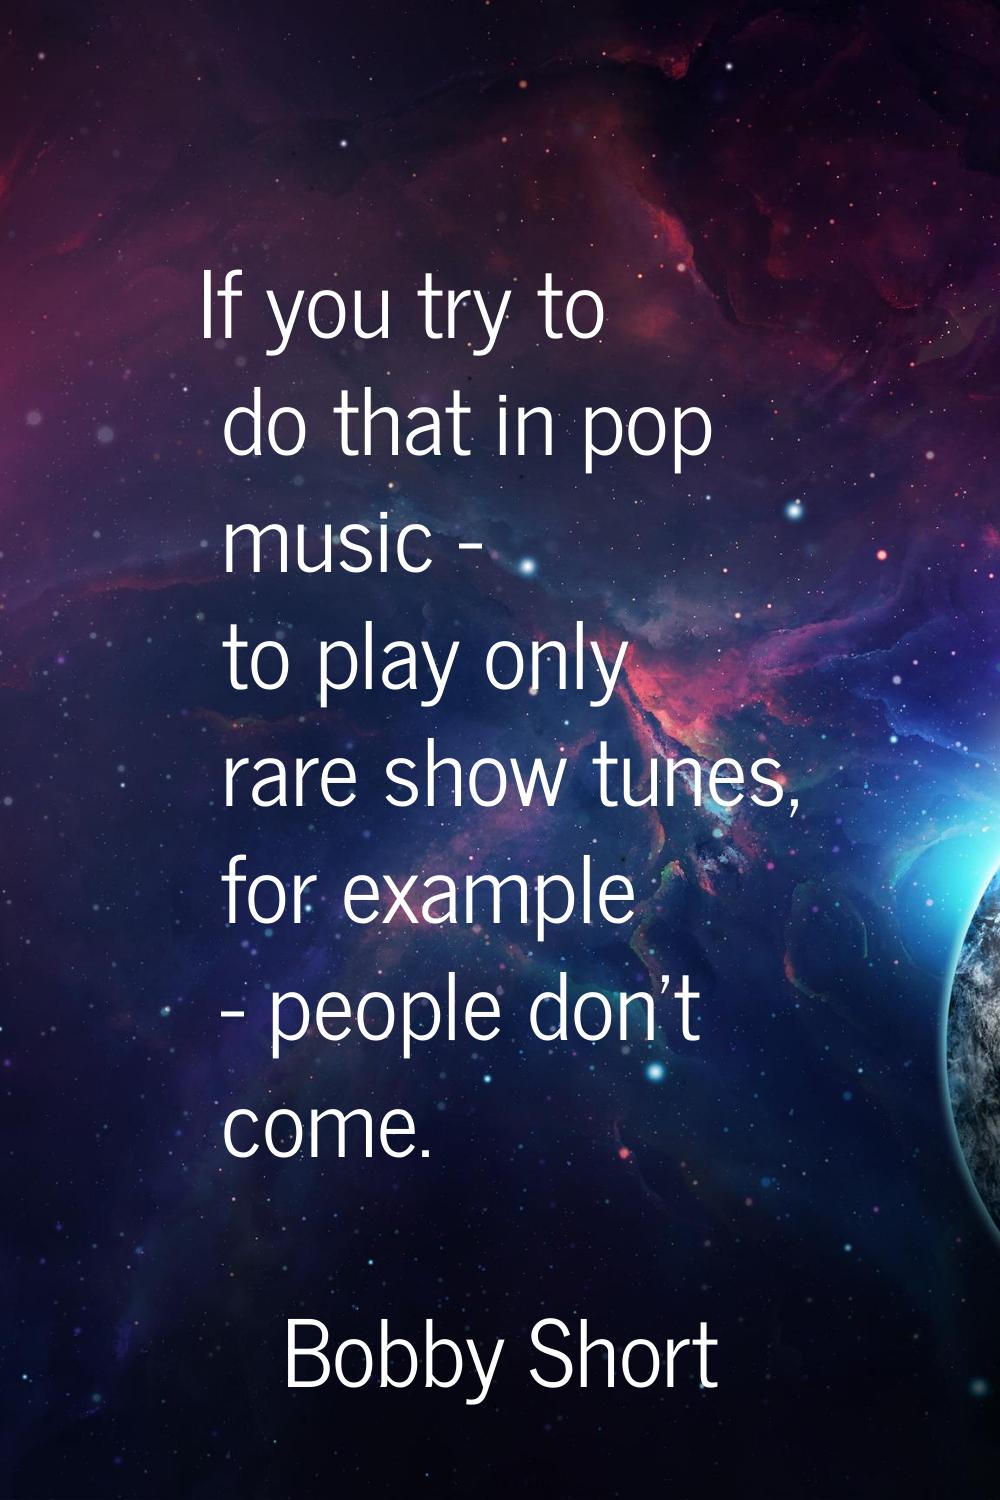 If you try to do that in pop music - to play only rare show tunes, for example - people don't come.